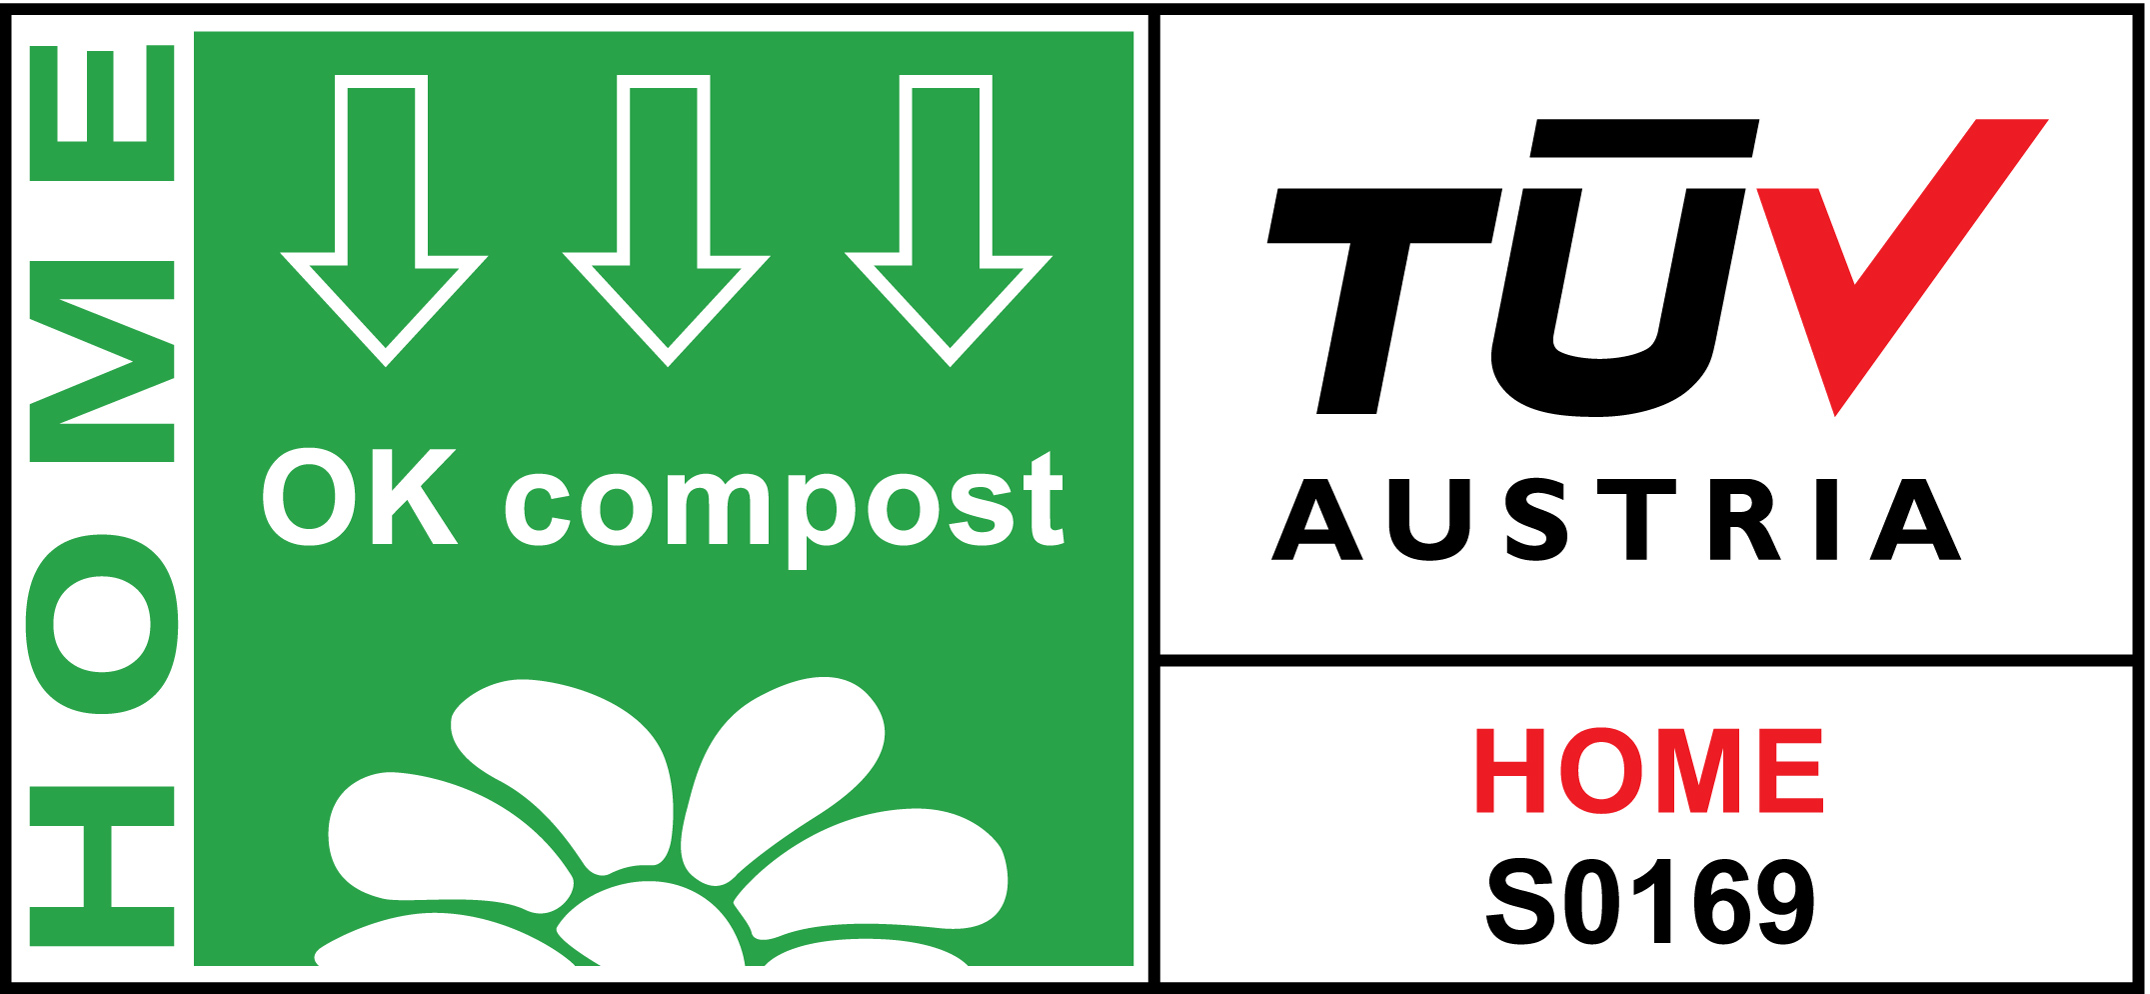 Five plants in Europe and Asia have been awarded OK compost HOME and OK compost INDUSTRIAL labels ...